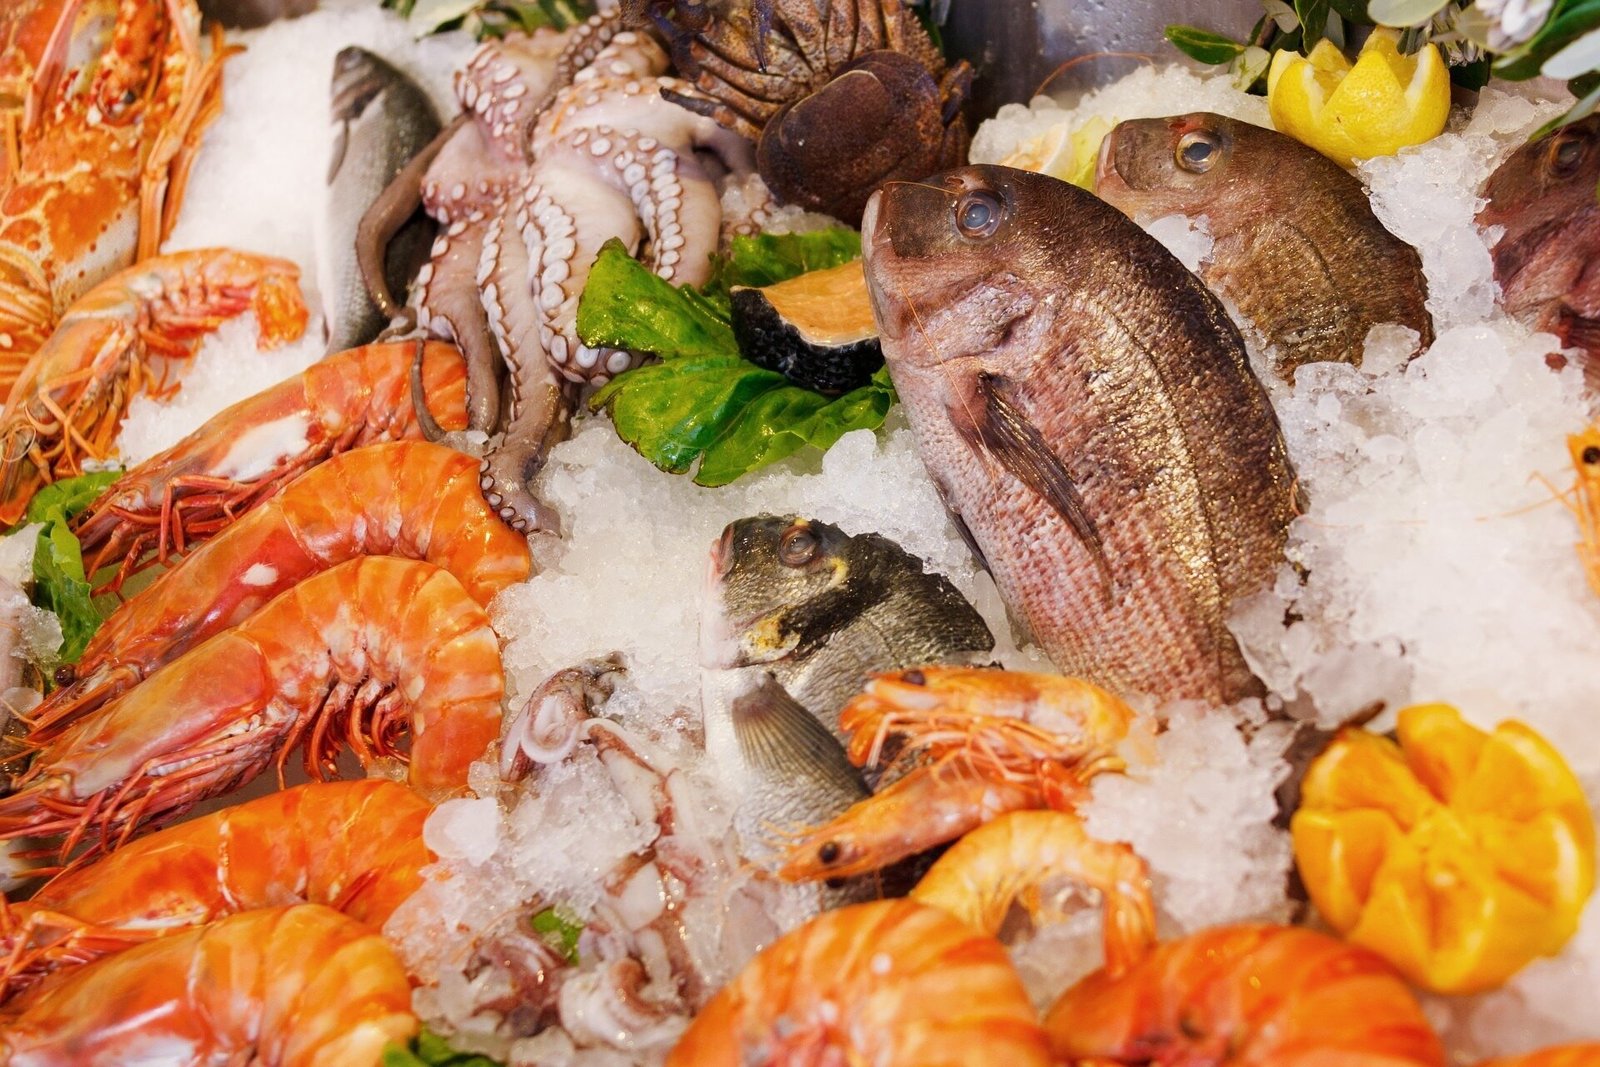 PFAS exposure from high seafood diets may be underestimated finds study